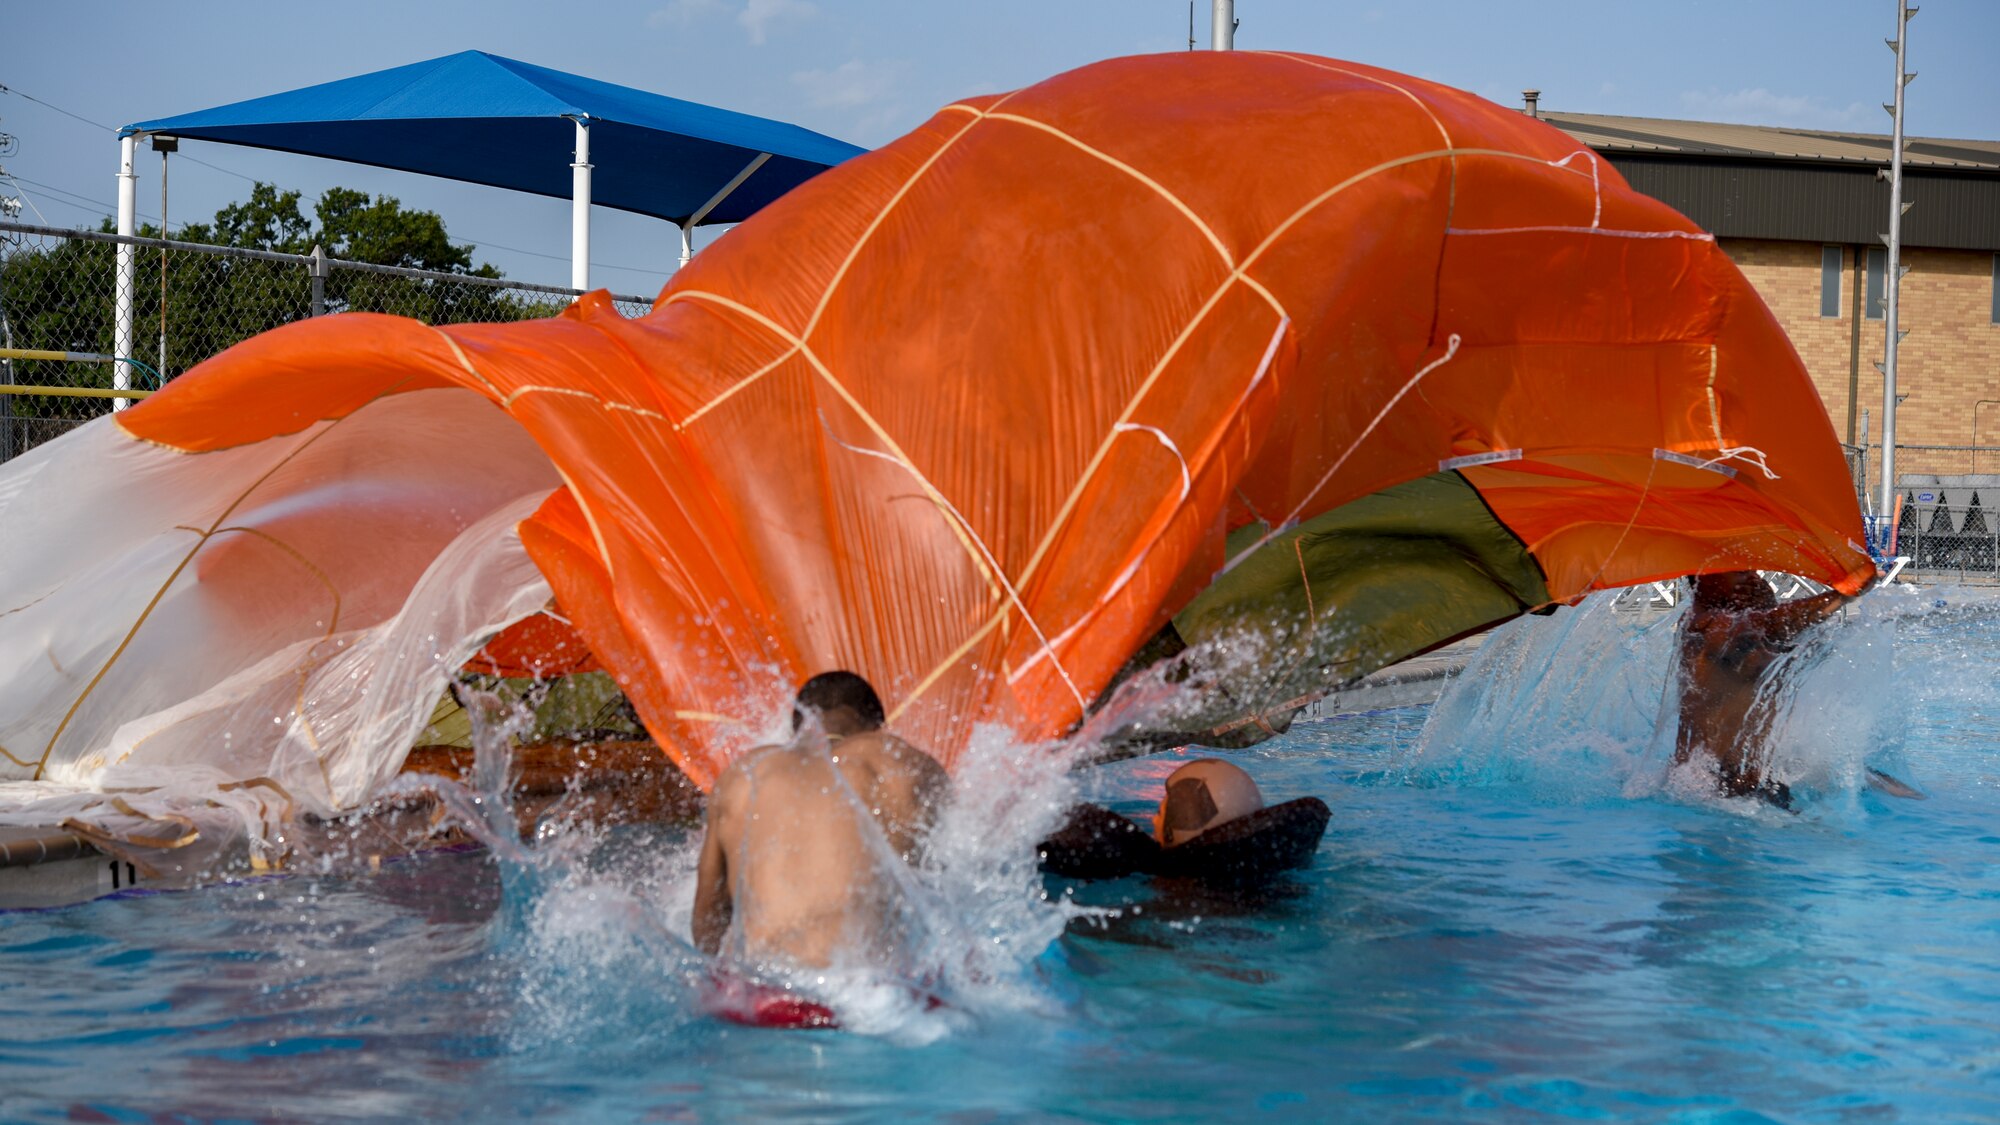 Two airman jump over a swimming pilot as they drape a parachute over her as part of the second scenario in the Water Survival Emergency Training.